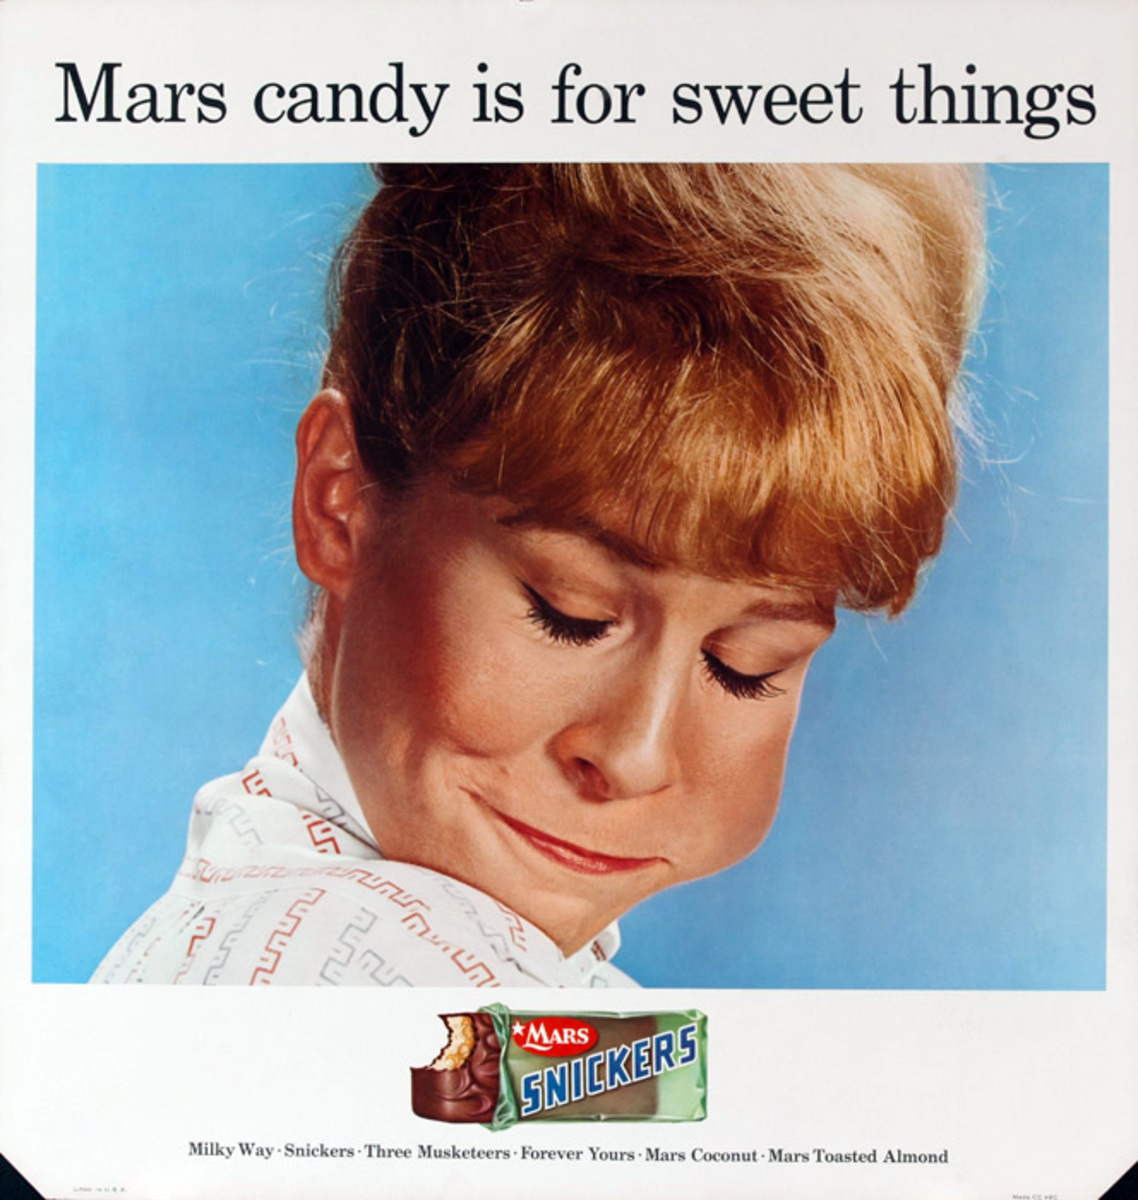 Mars Candy Original Advertising Poster, Mars Candy is for sweet things.